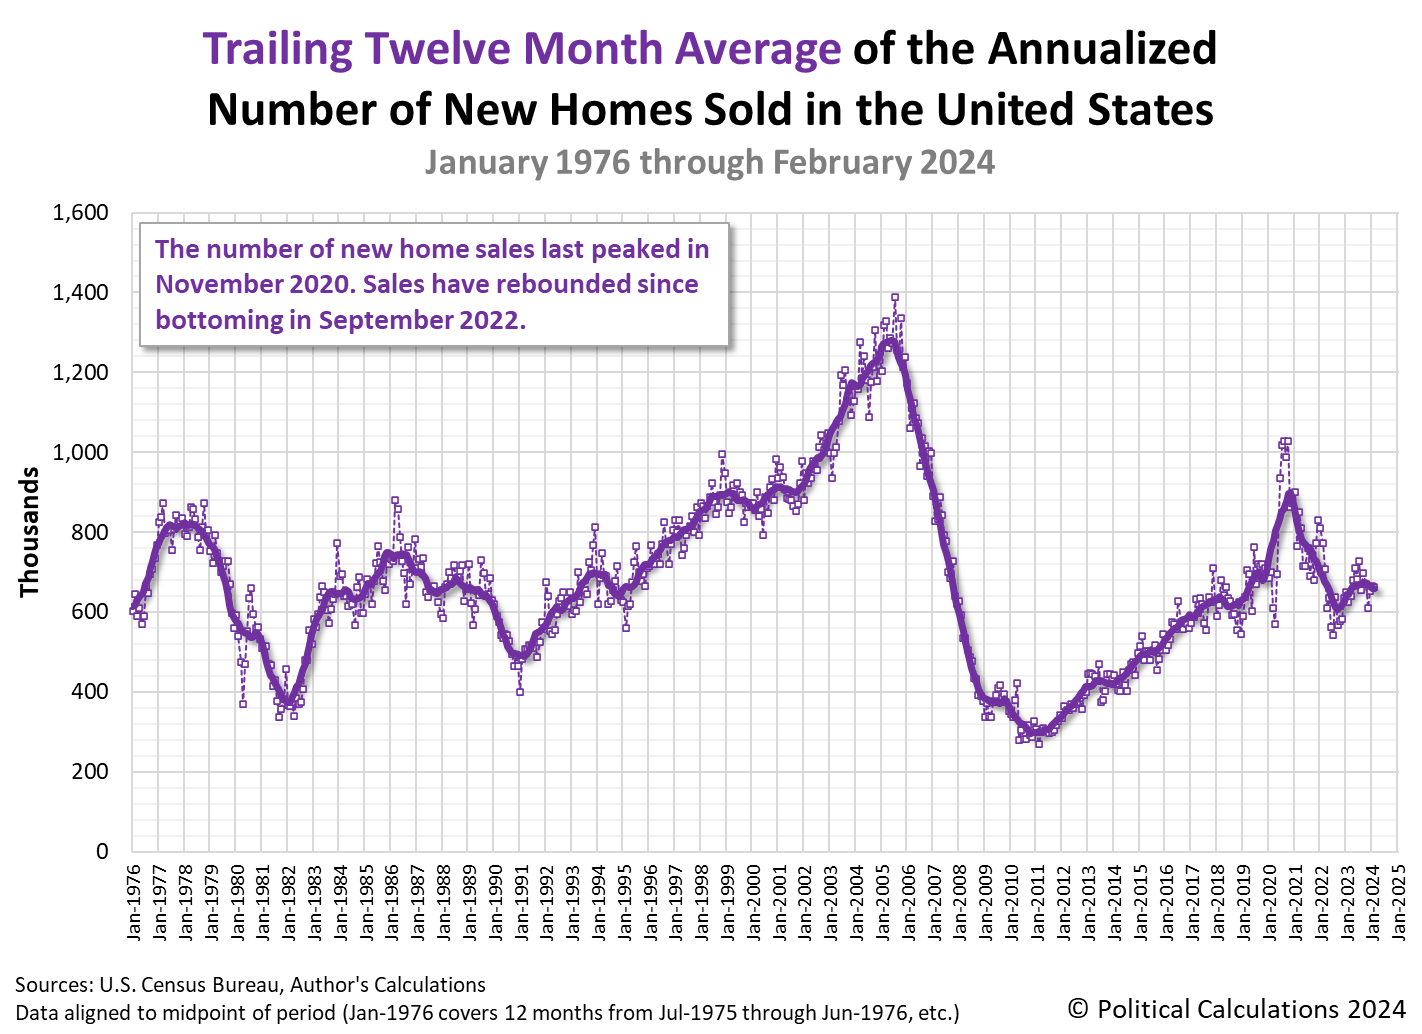 Trailing Twelve Month Average of the Annualized Number of New Homes Sold in the U.S., January 1976 - February 2024